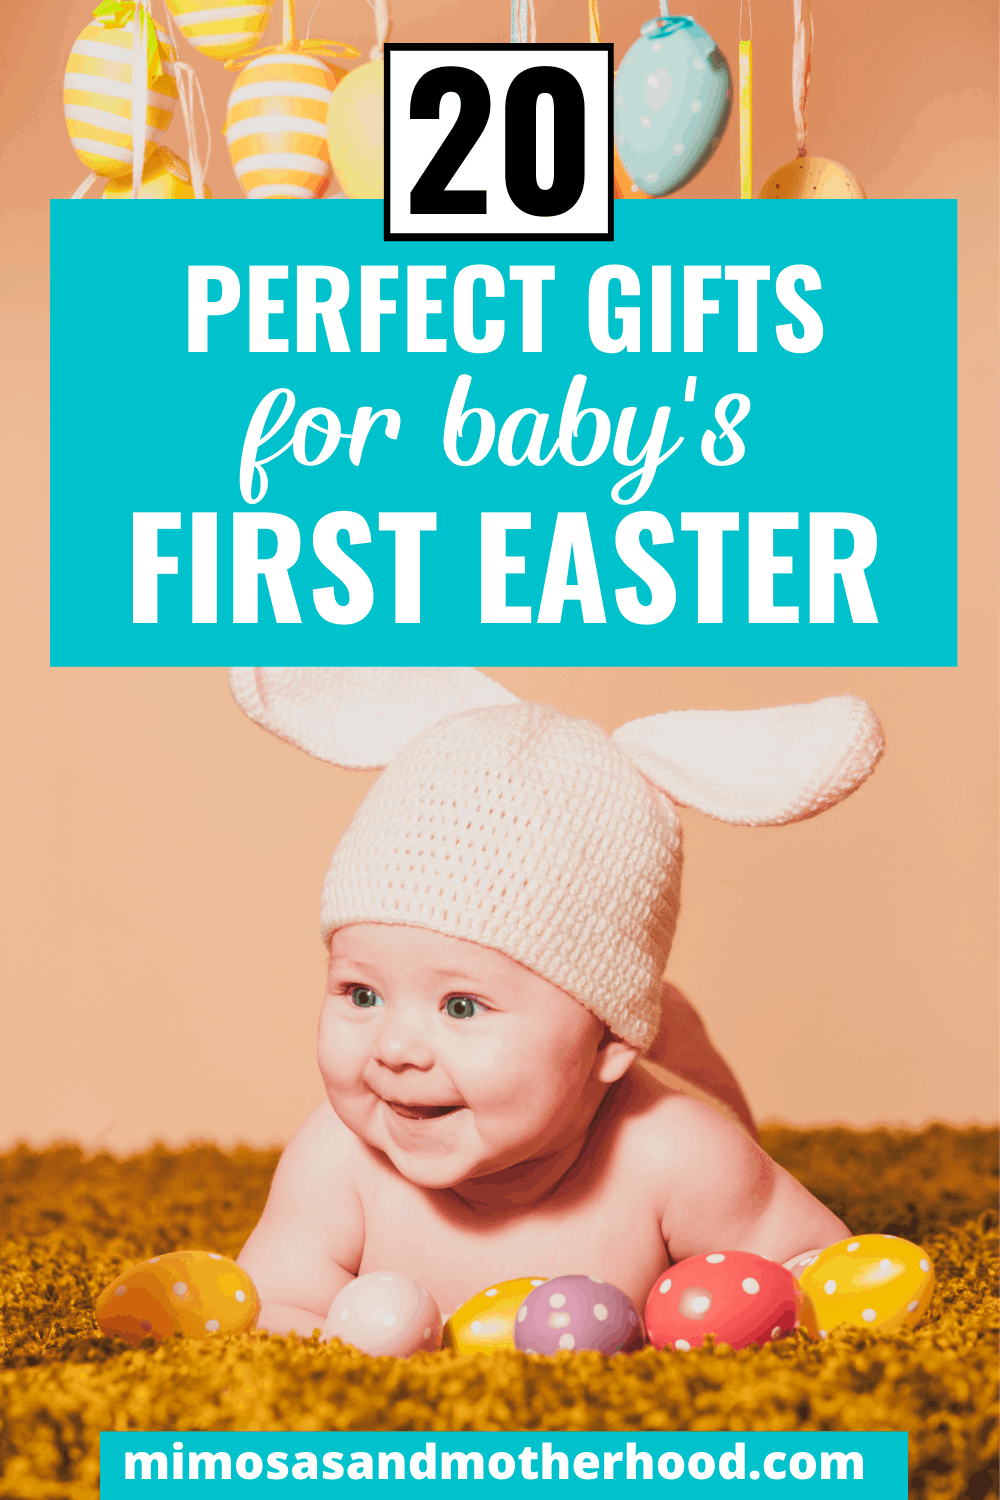 The Perfect Gifts for Baby's First Easter - Mimosas & Motherhood